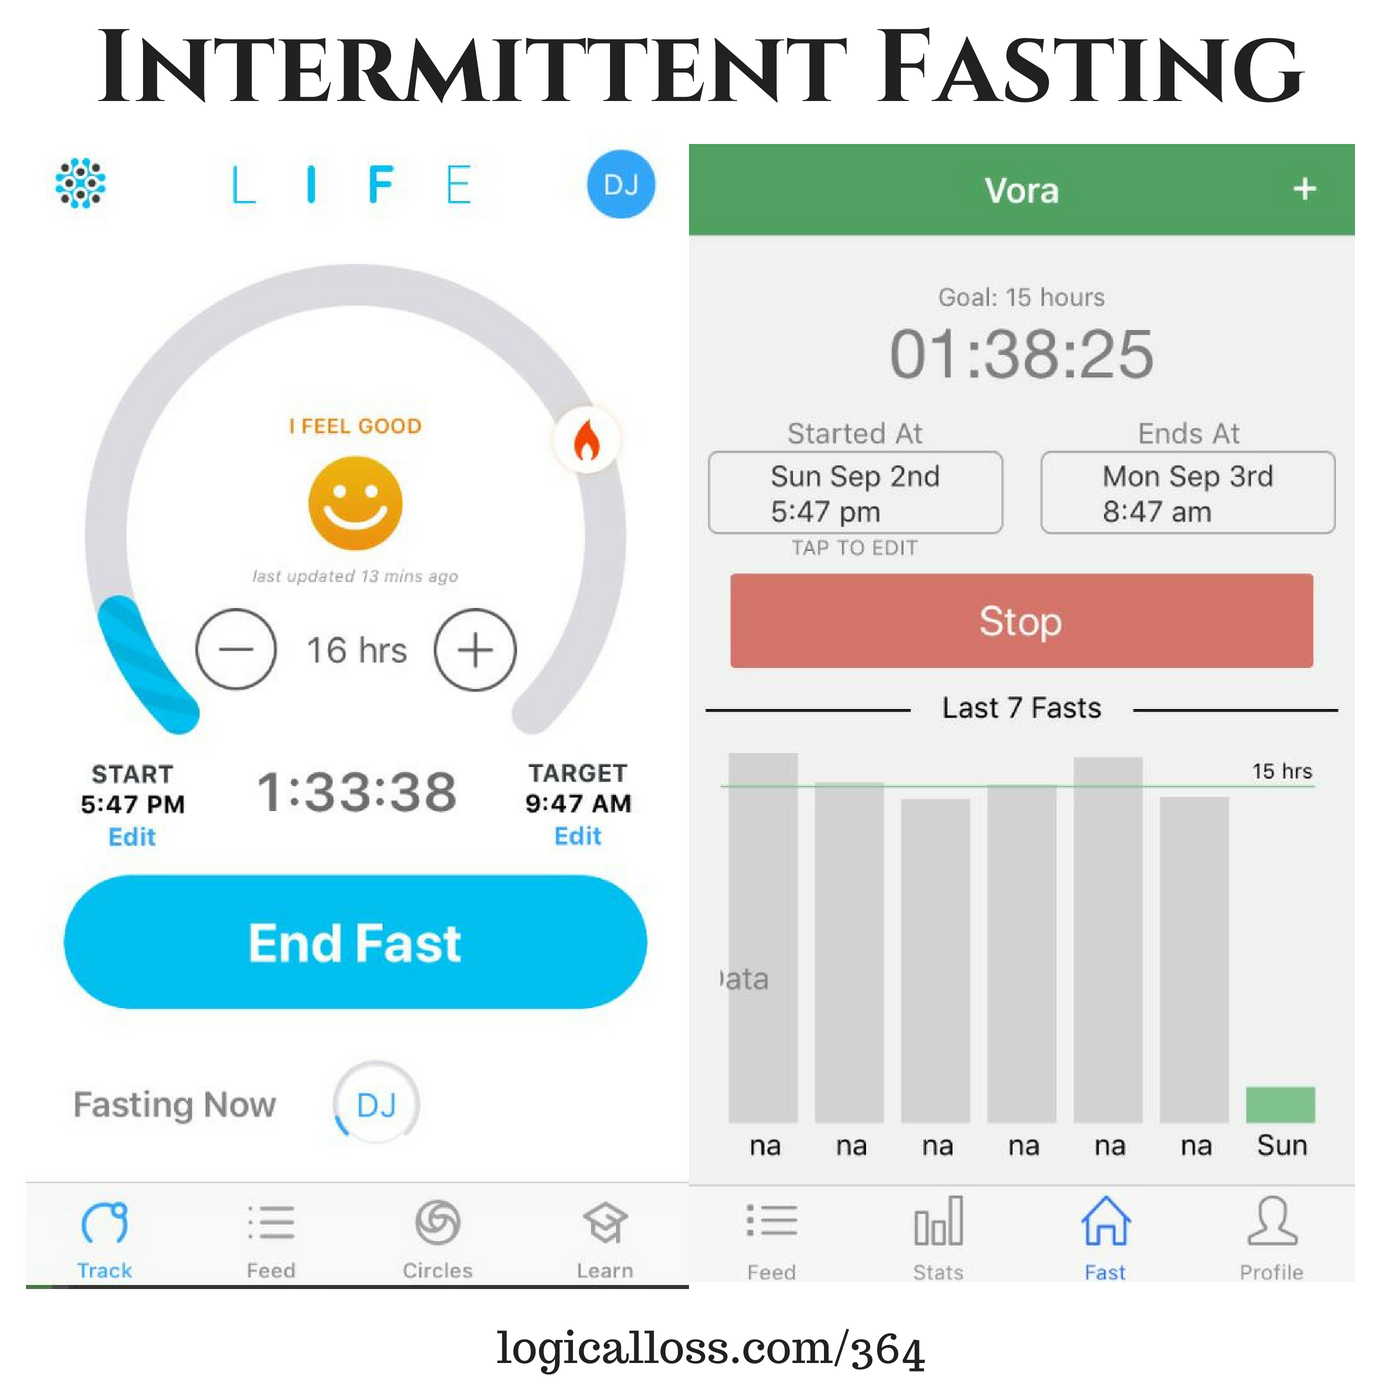 What’s The Deal With Intermittent Fasting